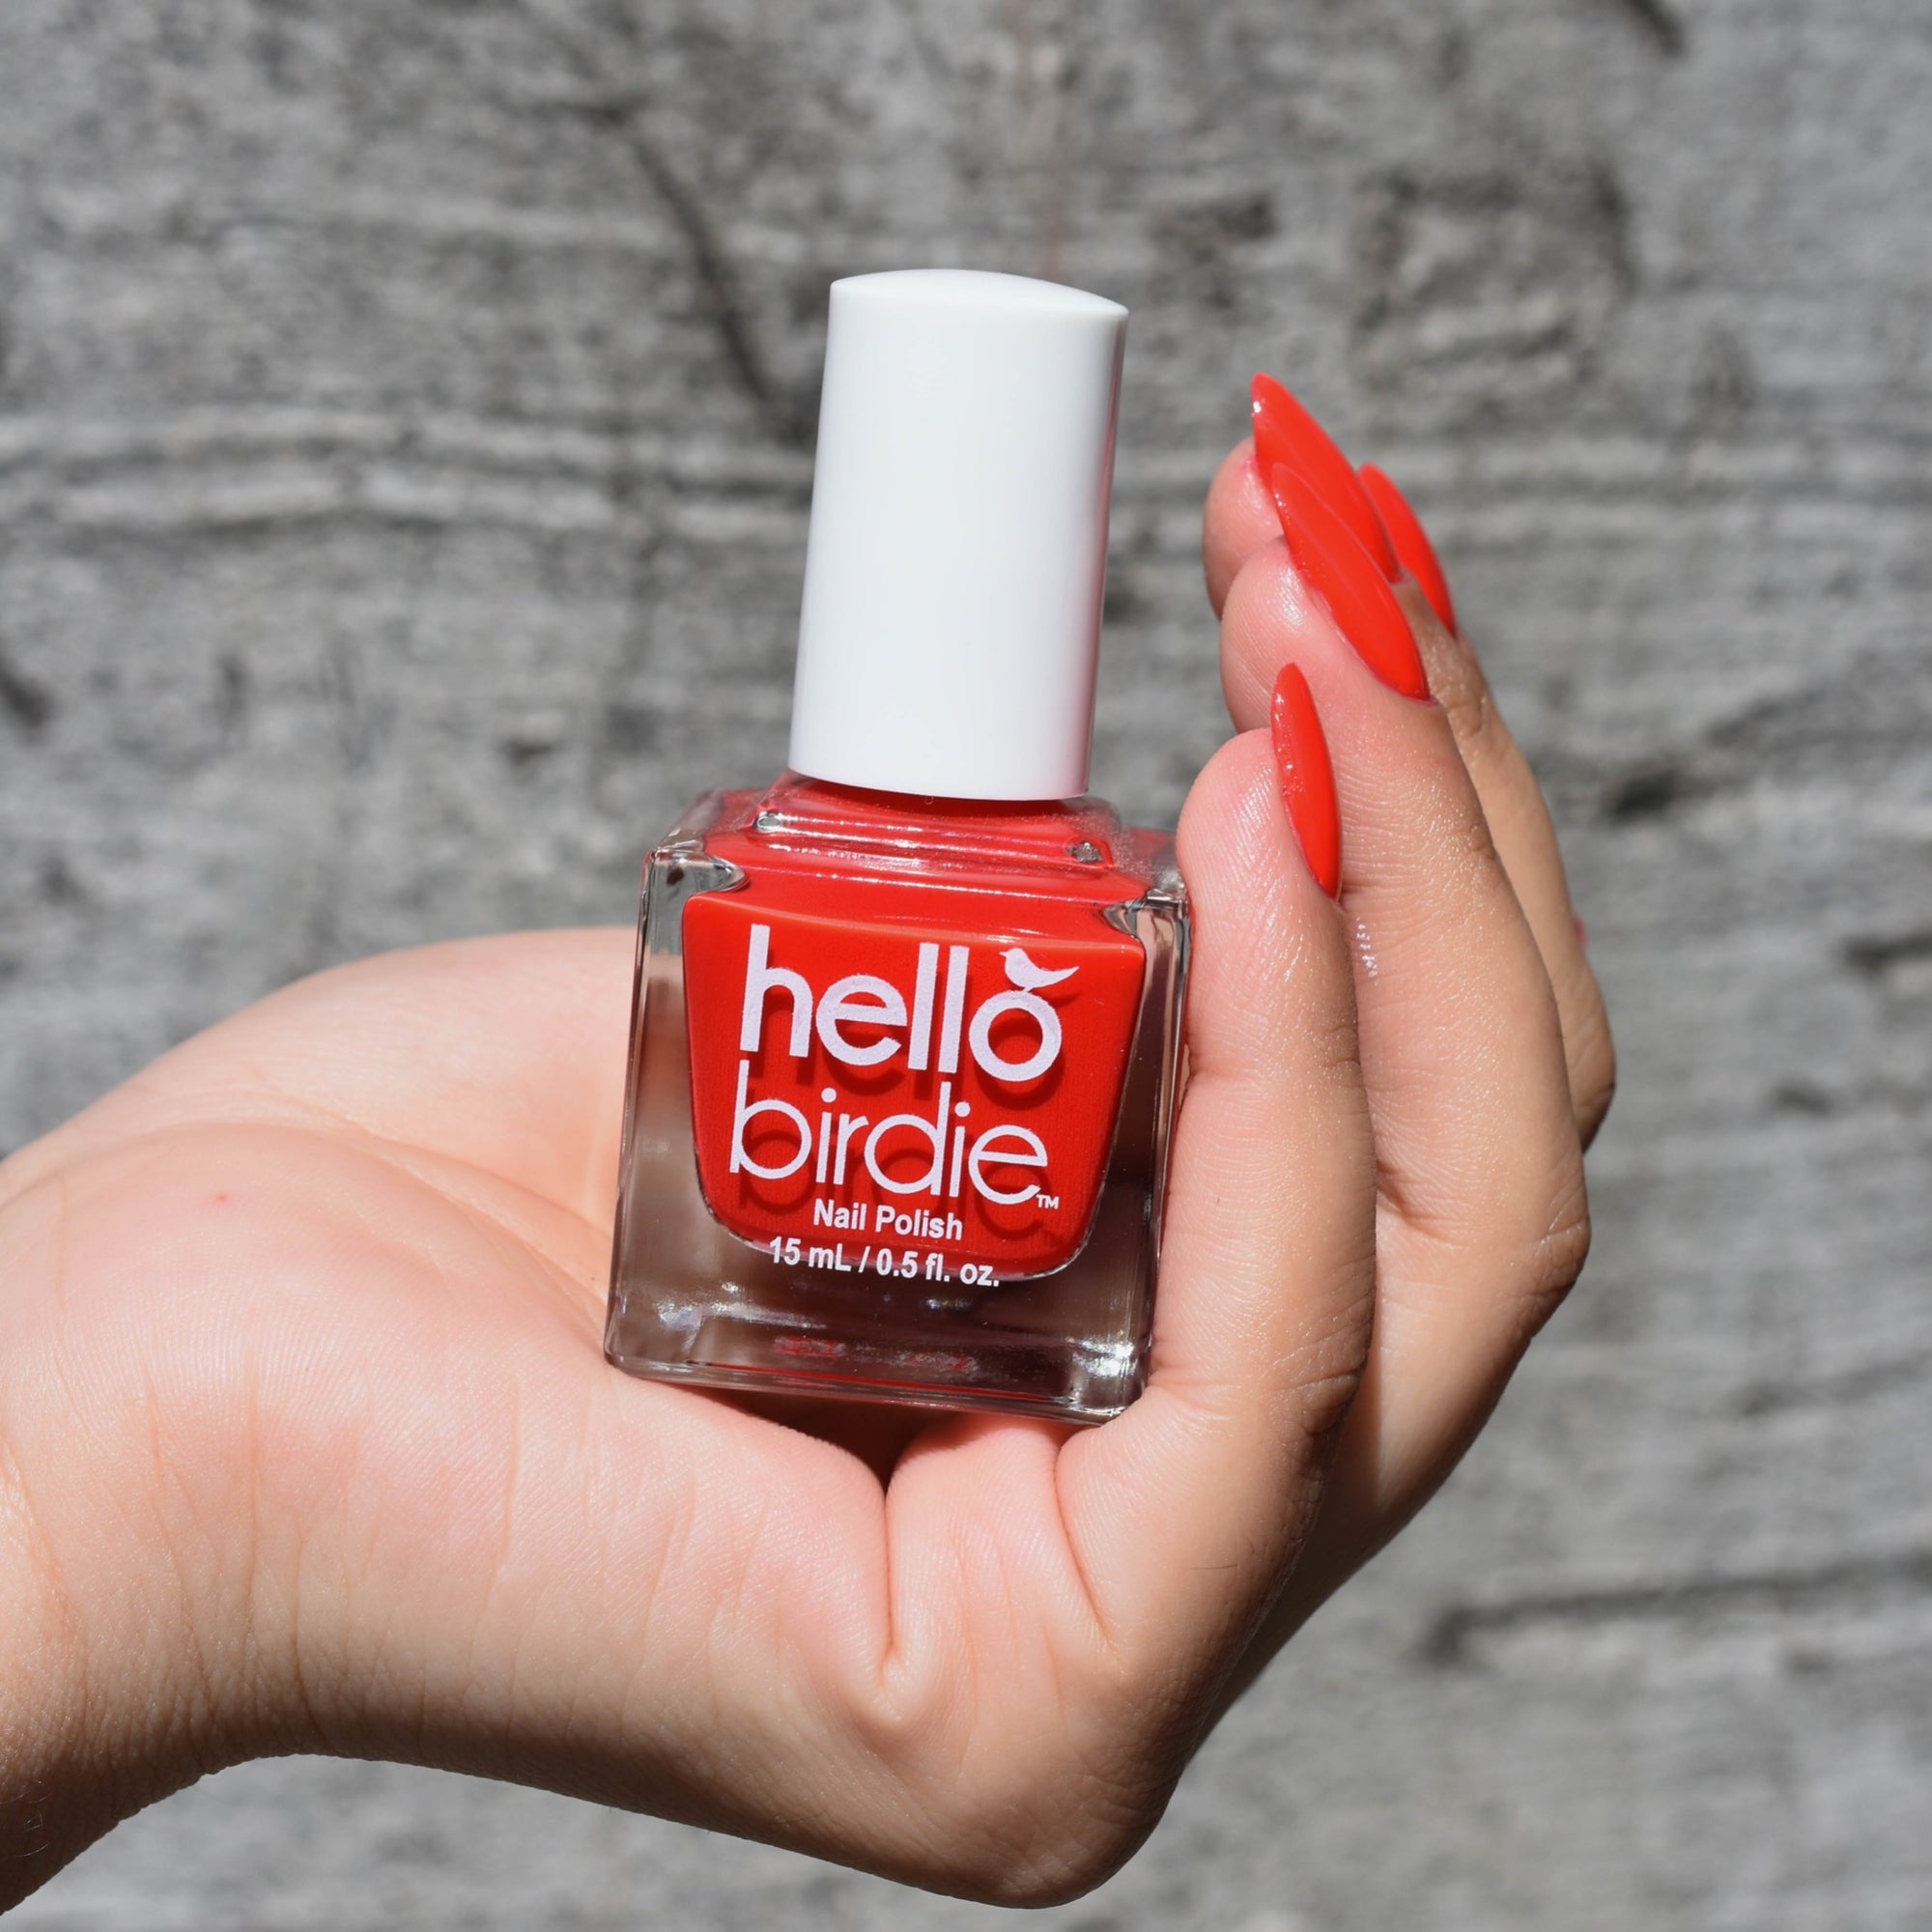 A model is holding a bottle of Cheep Thrill from Hello Birdie Nail Polish. The color is a poppy red and is in the bottle and painted on the model's hand which has a medium skin tone. The background is a grey bark.